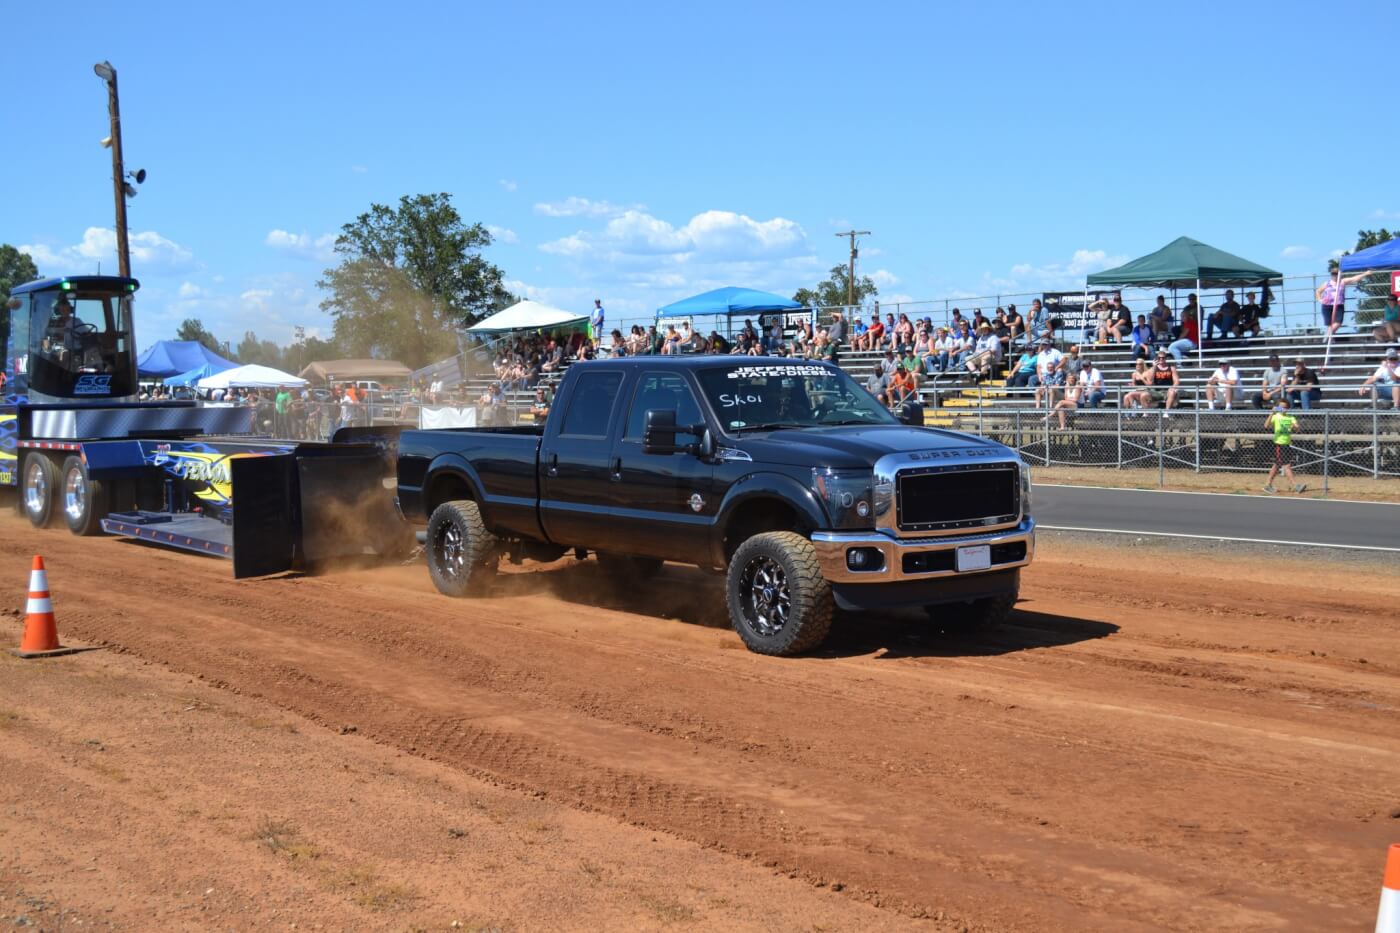 Jeremy Wright, one of the co-owners of Jefferson State Diesel, made an appearance in the Stock Class, where he finished mid-pack in his daily driven Ford. 